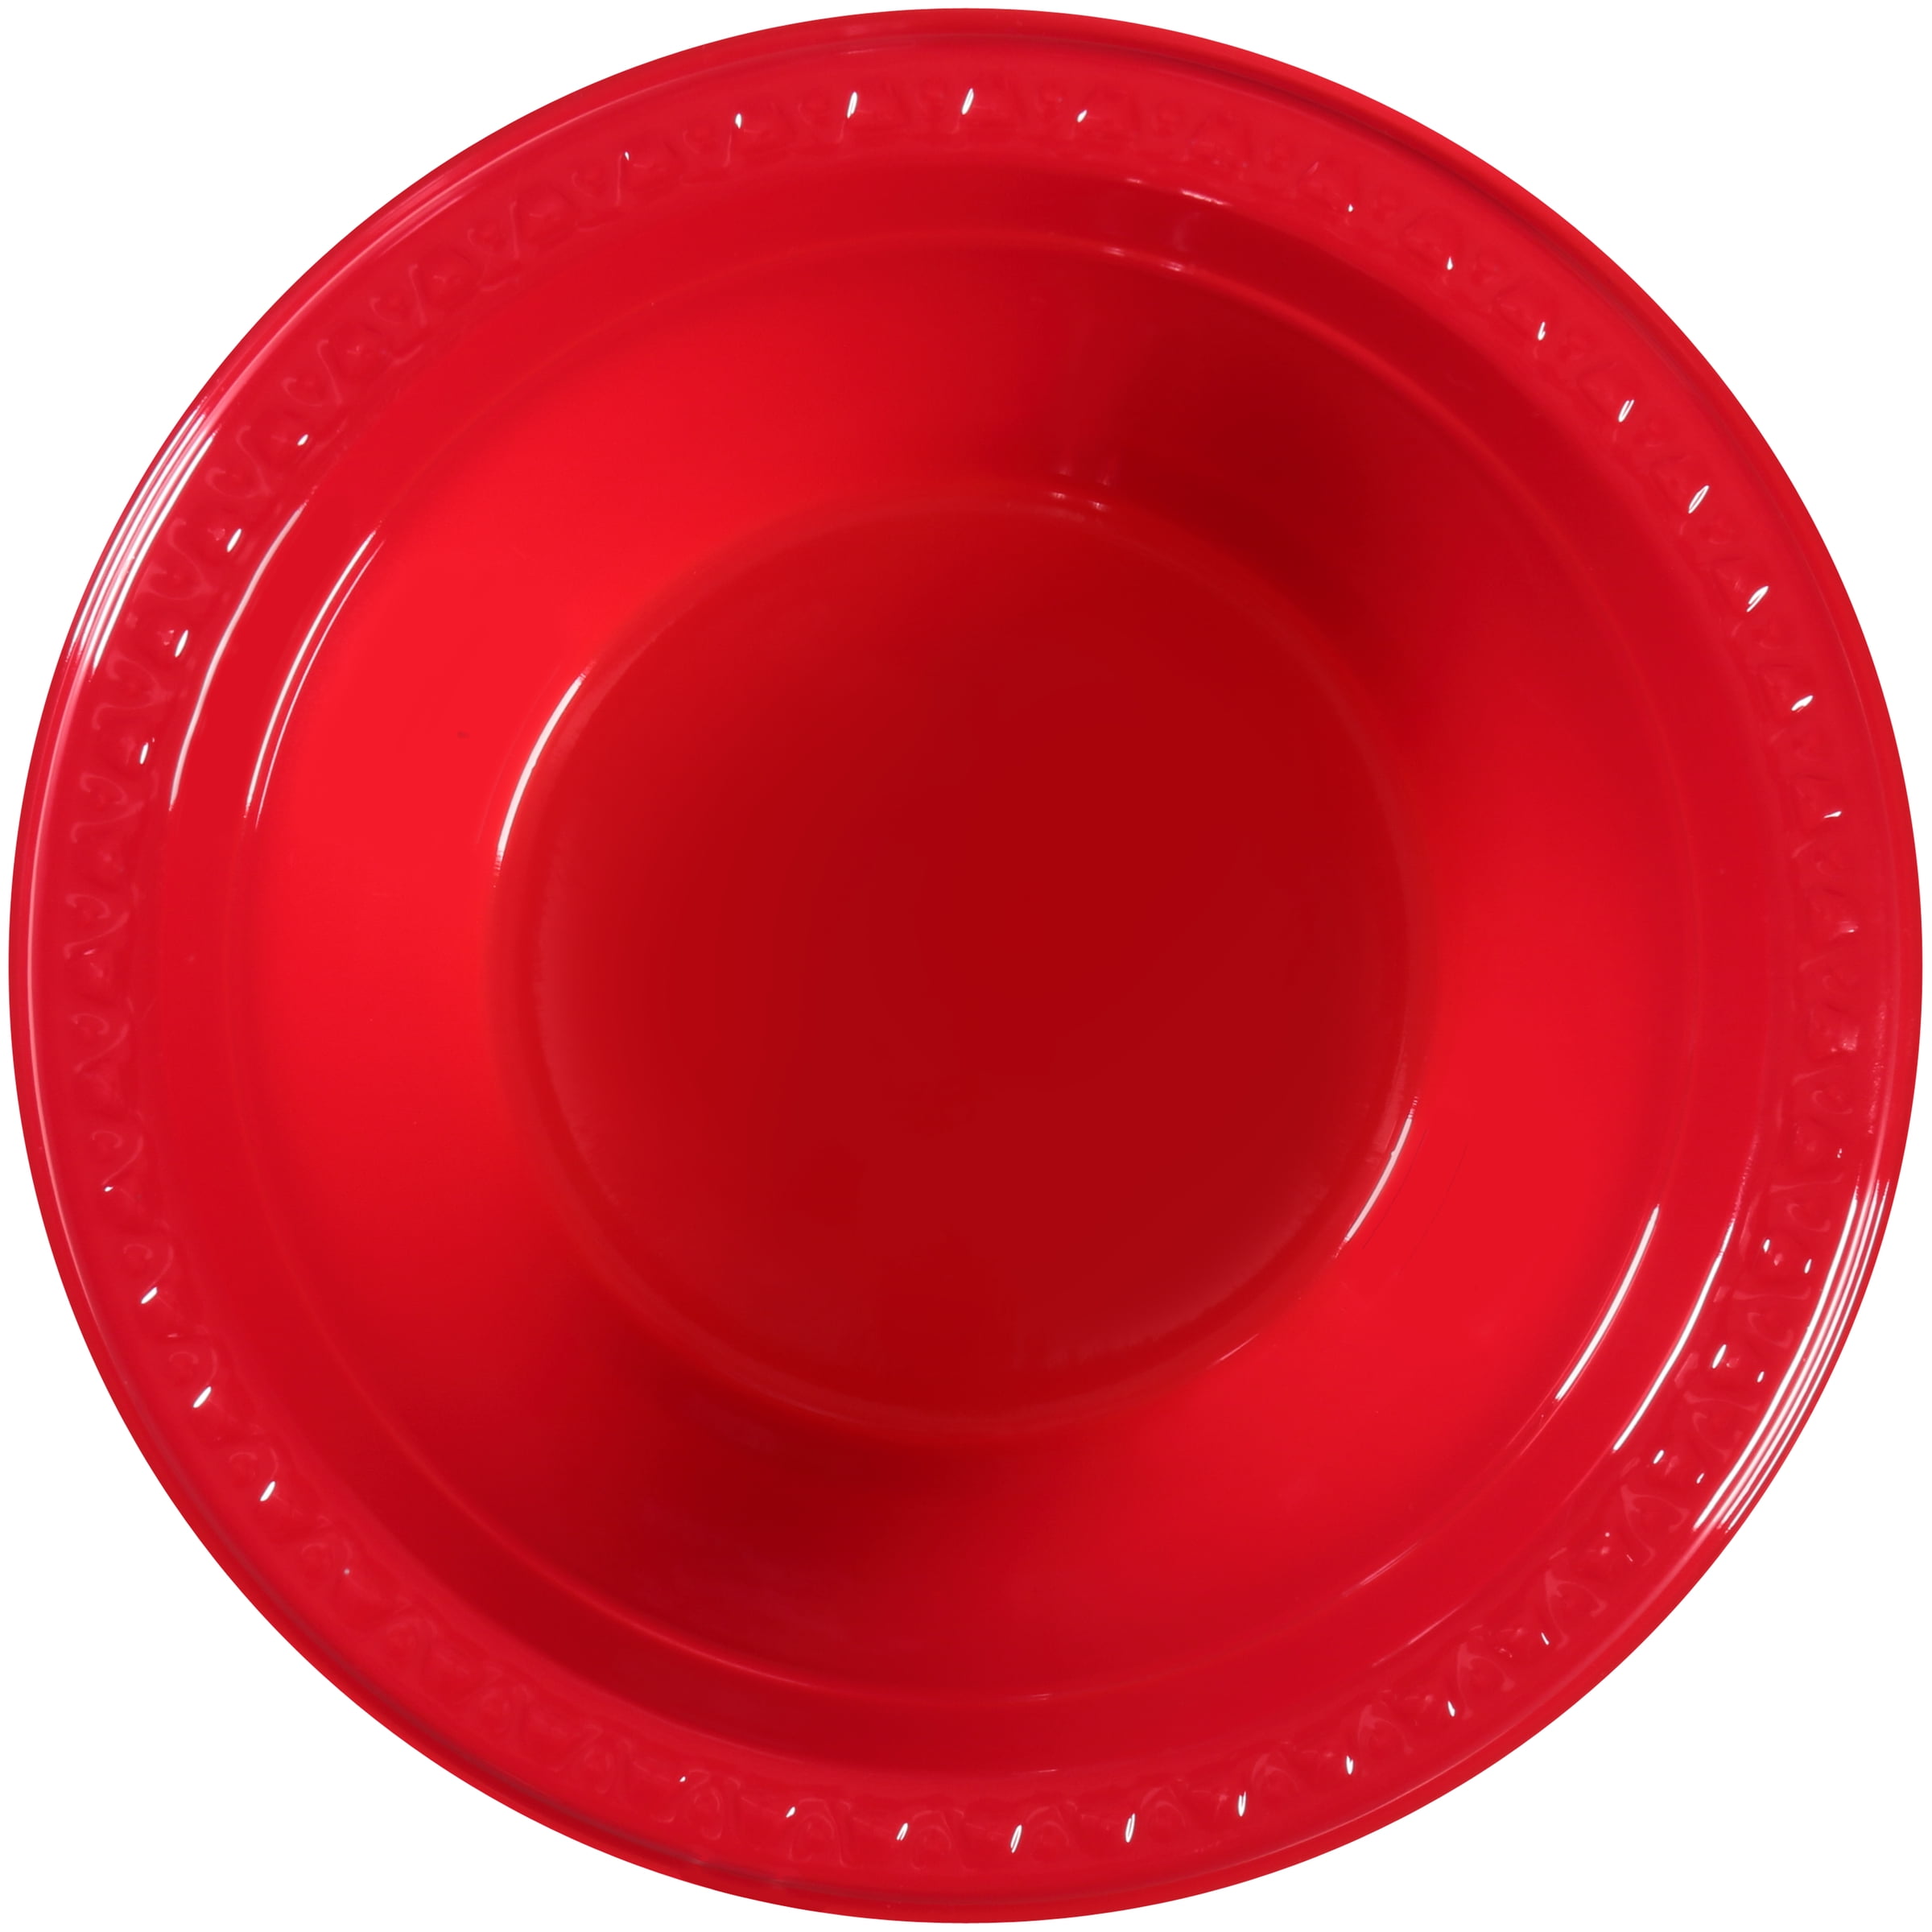 Great Value Everyday Disposable Plastic Compartment Plate, Red, 10.25, 25  count 